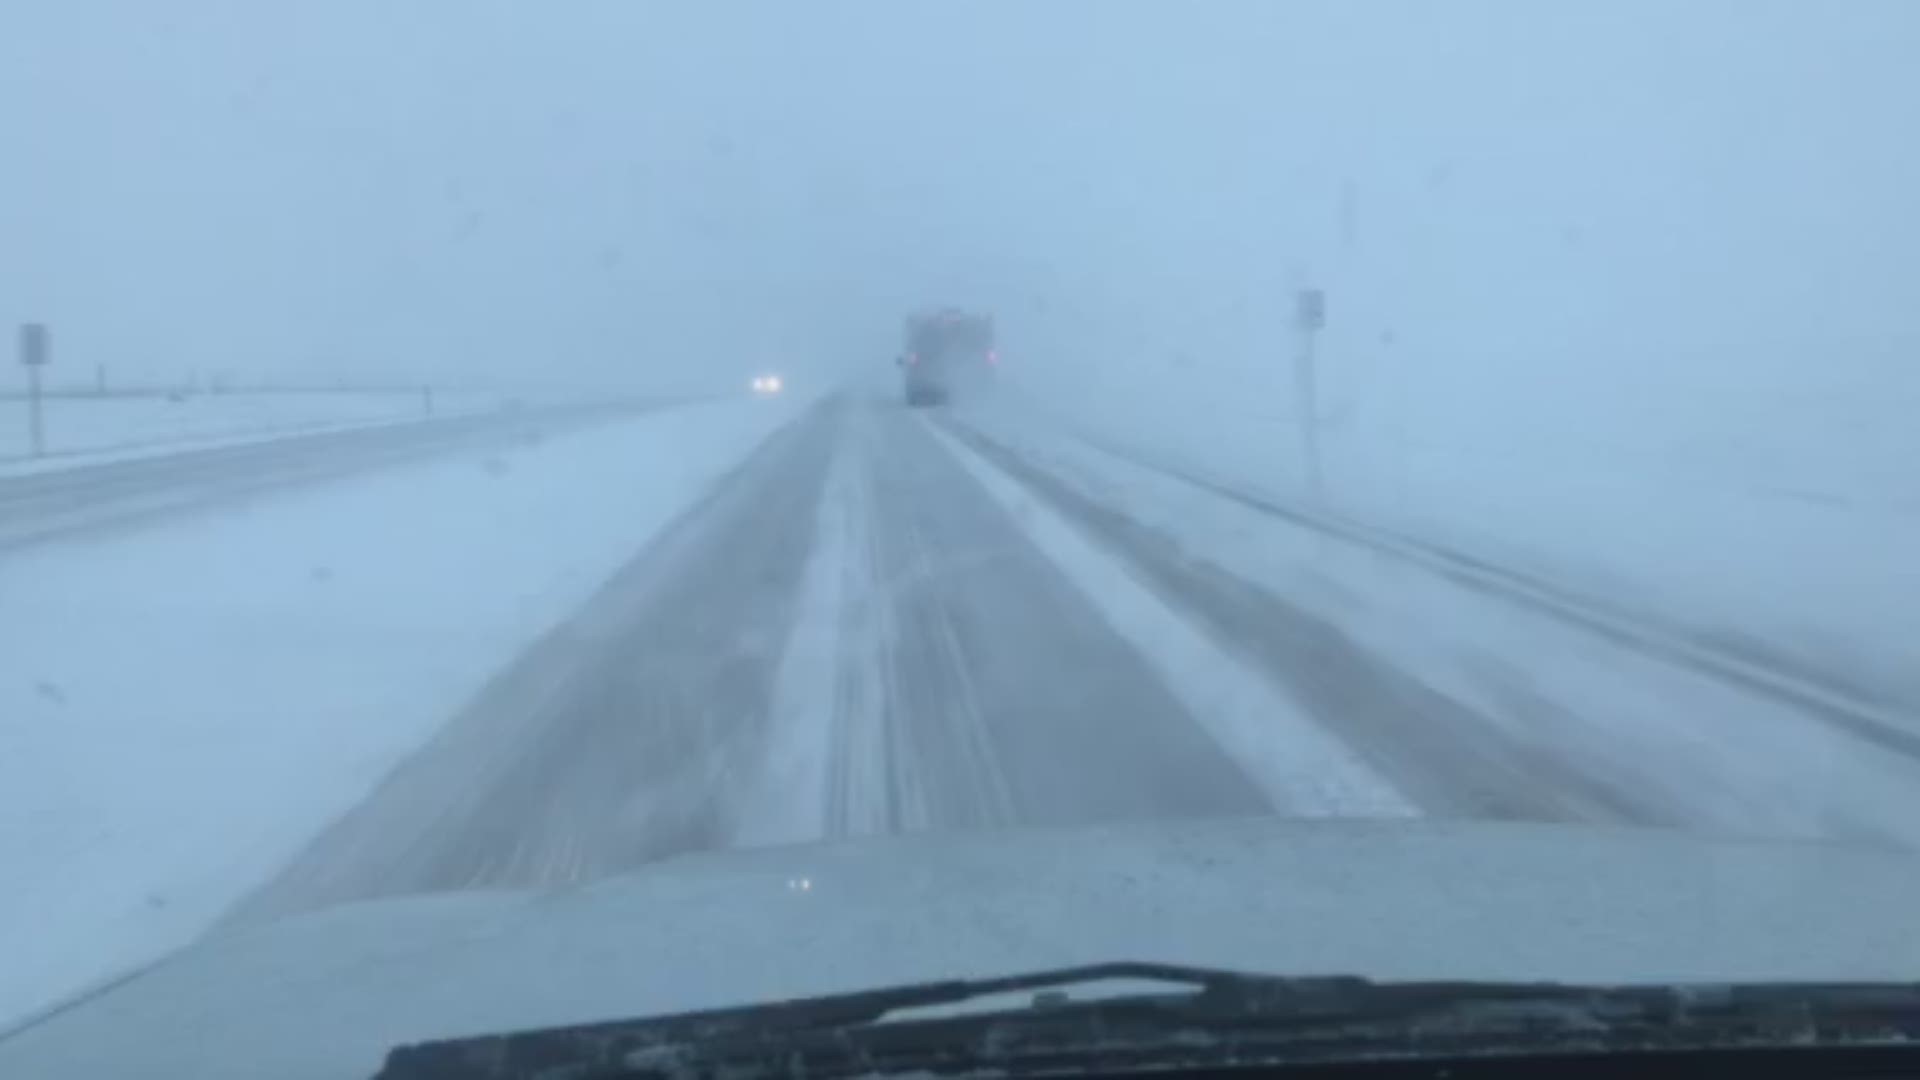 Areas north and east of Denver were under a snow squall warning Wednesday evening. Here's what conditions looked like.